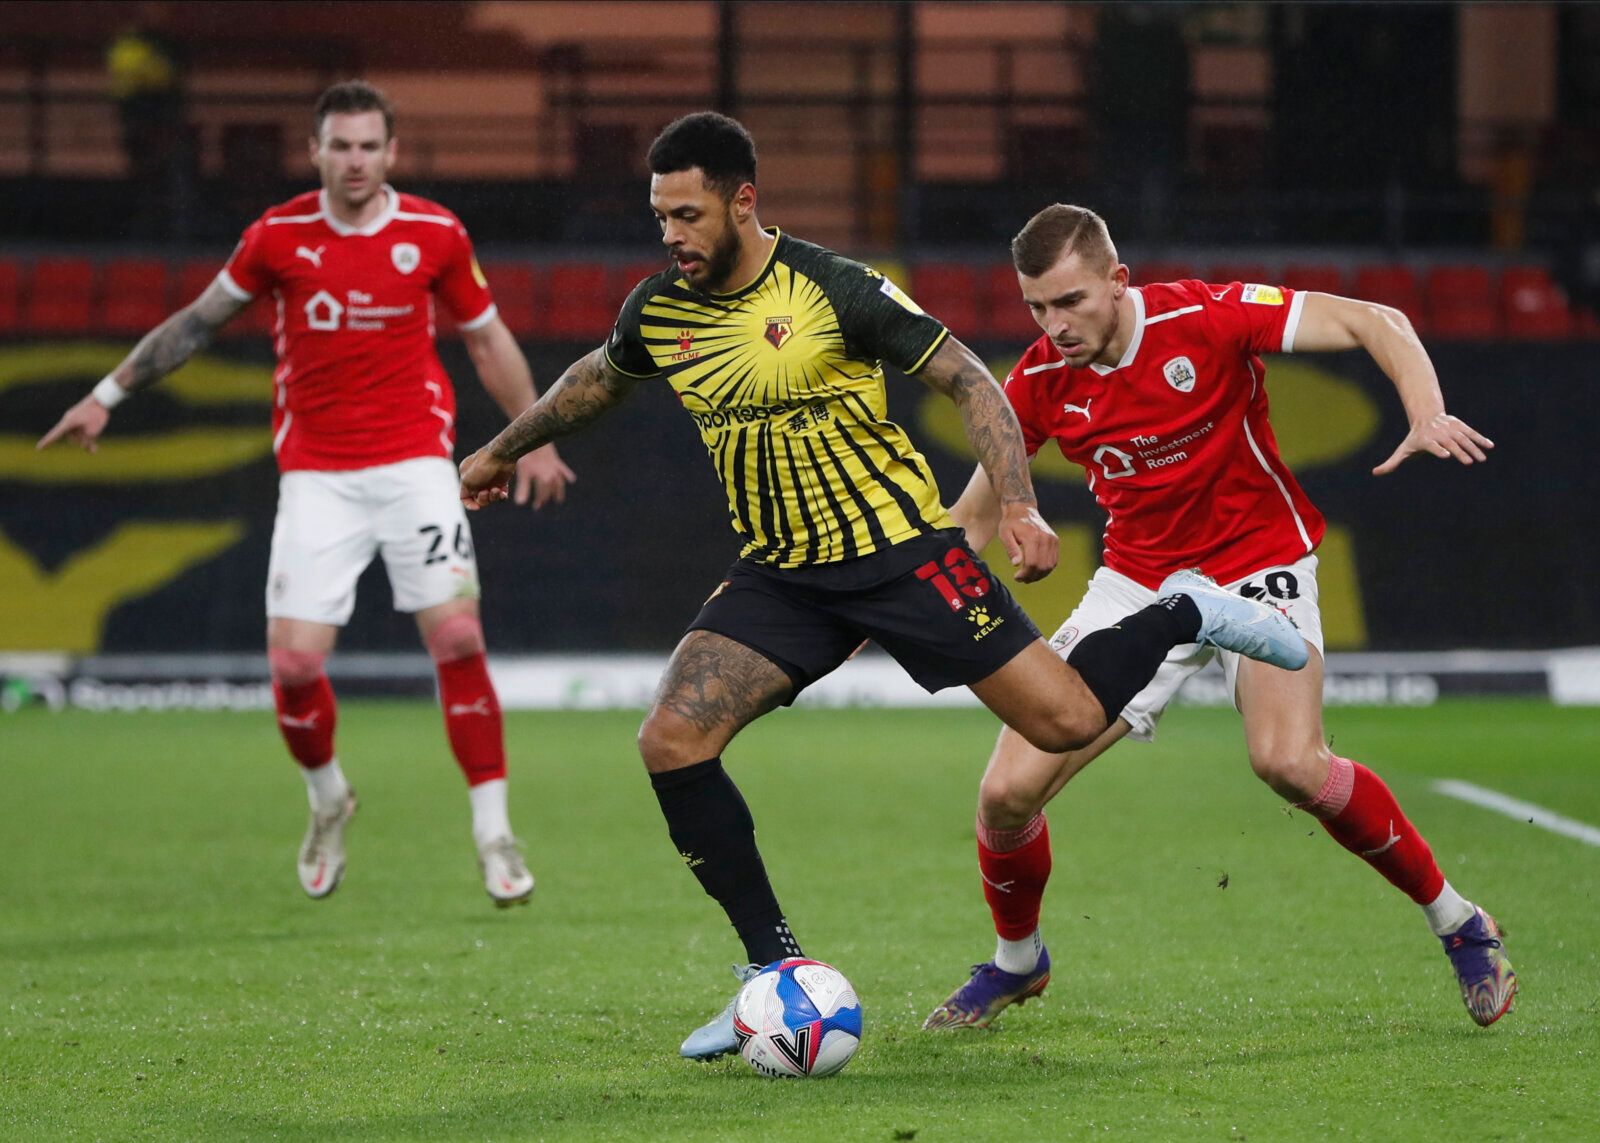 Soccer Football - Championship - Watford v Barnsley - Vicarage Road, Watford, Britain - January 19, 2021 Watford's Andre Gray in action with Barnsley's Michal Helik Action Images/Paul Childs EDITORIAL USE ONLY. No use with unauthorized audio, video, data, fixture lists, club/league logos or 'live' services. Online in-match use limited to 75 images, no video emulation. No use in betting, games or single club /league/player publications.  Please contact your account representative for further deta